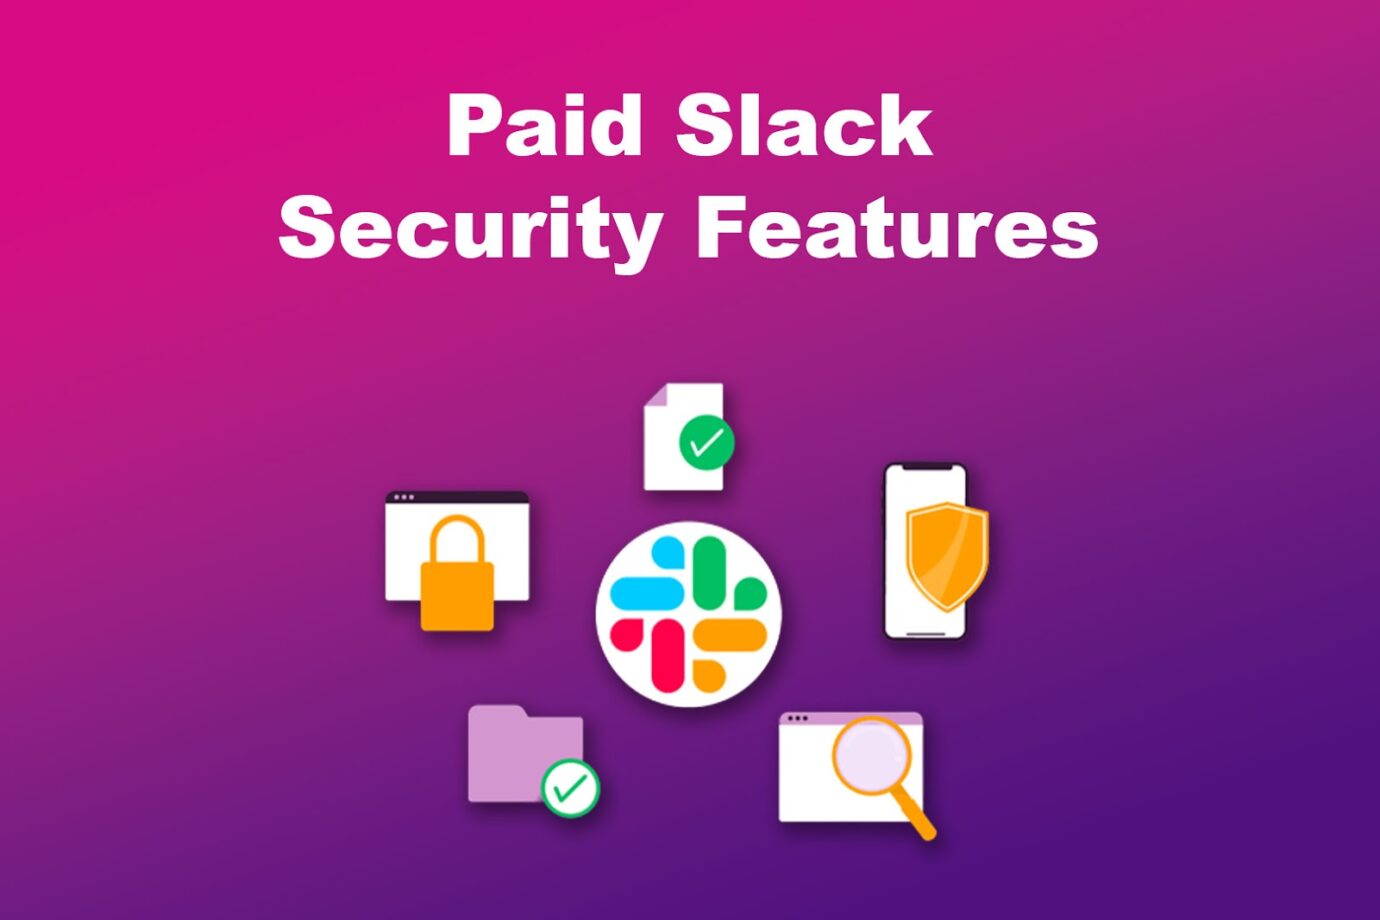 Paid Slack Security Features